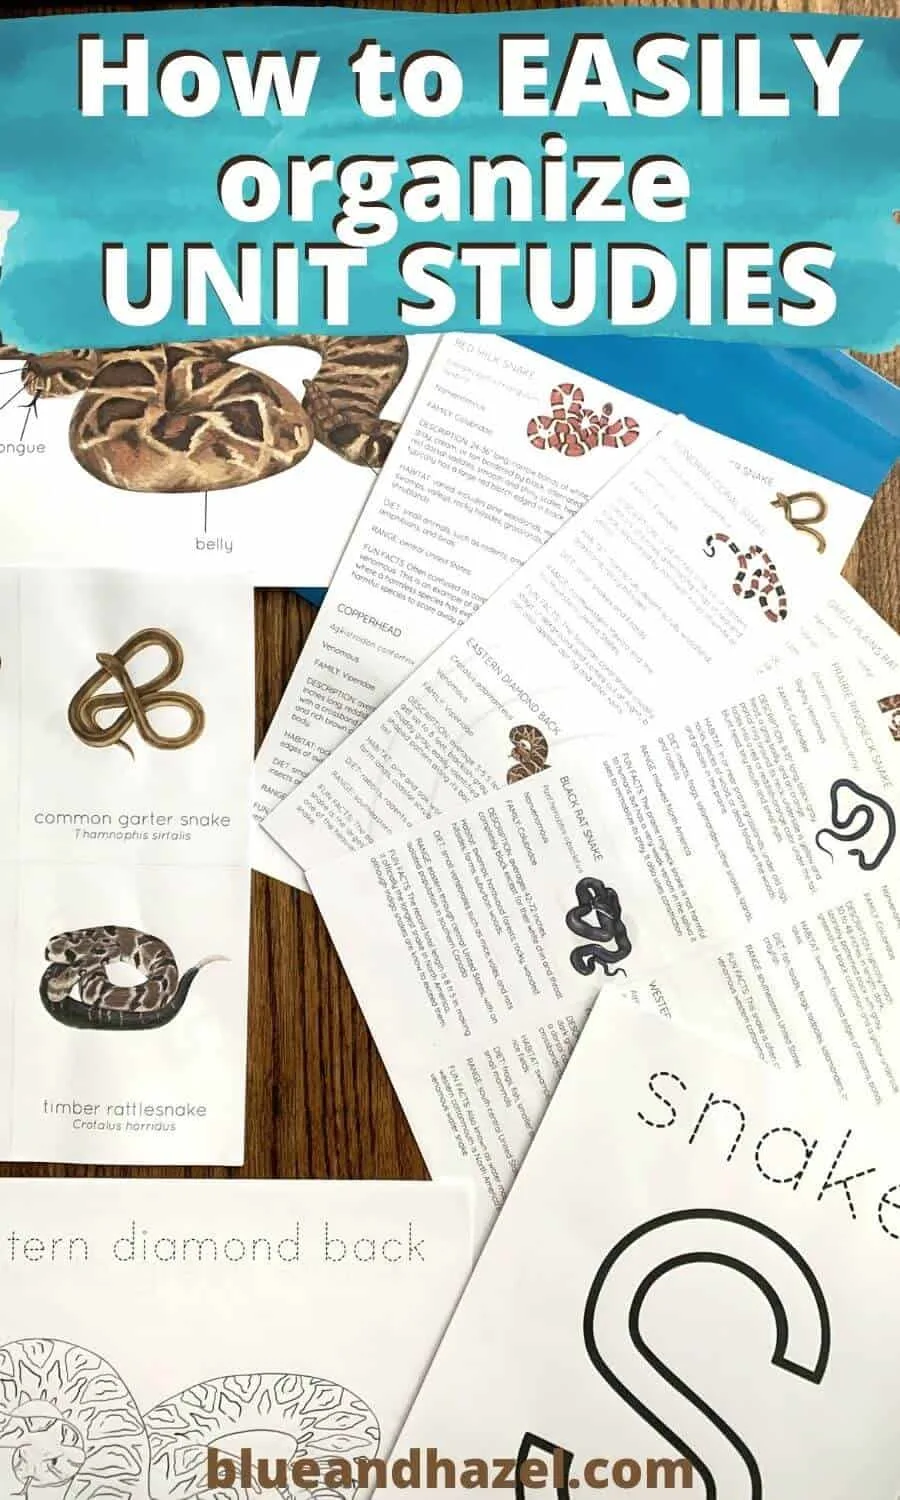 How to store and organize print outs for ANY unit study, like this mini snake unit study here by StephHathawayDesigns on Etsy. 